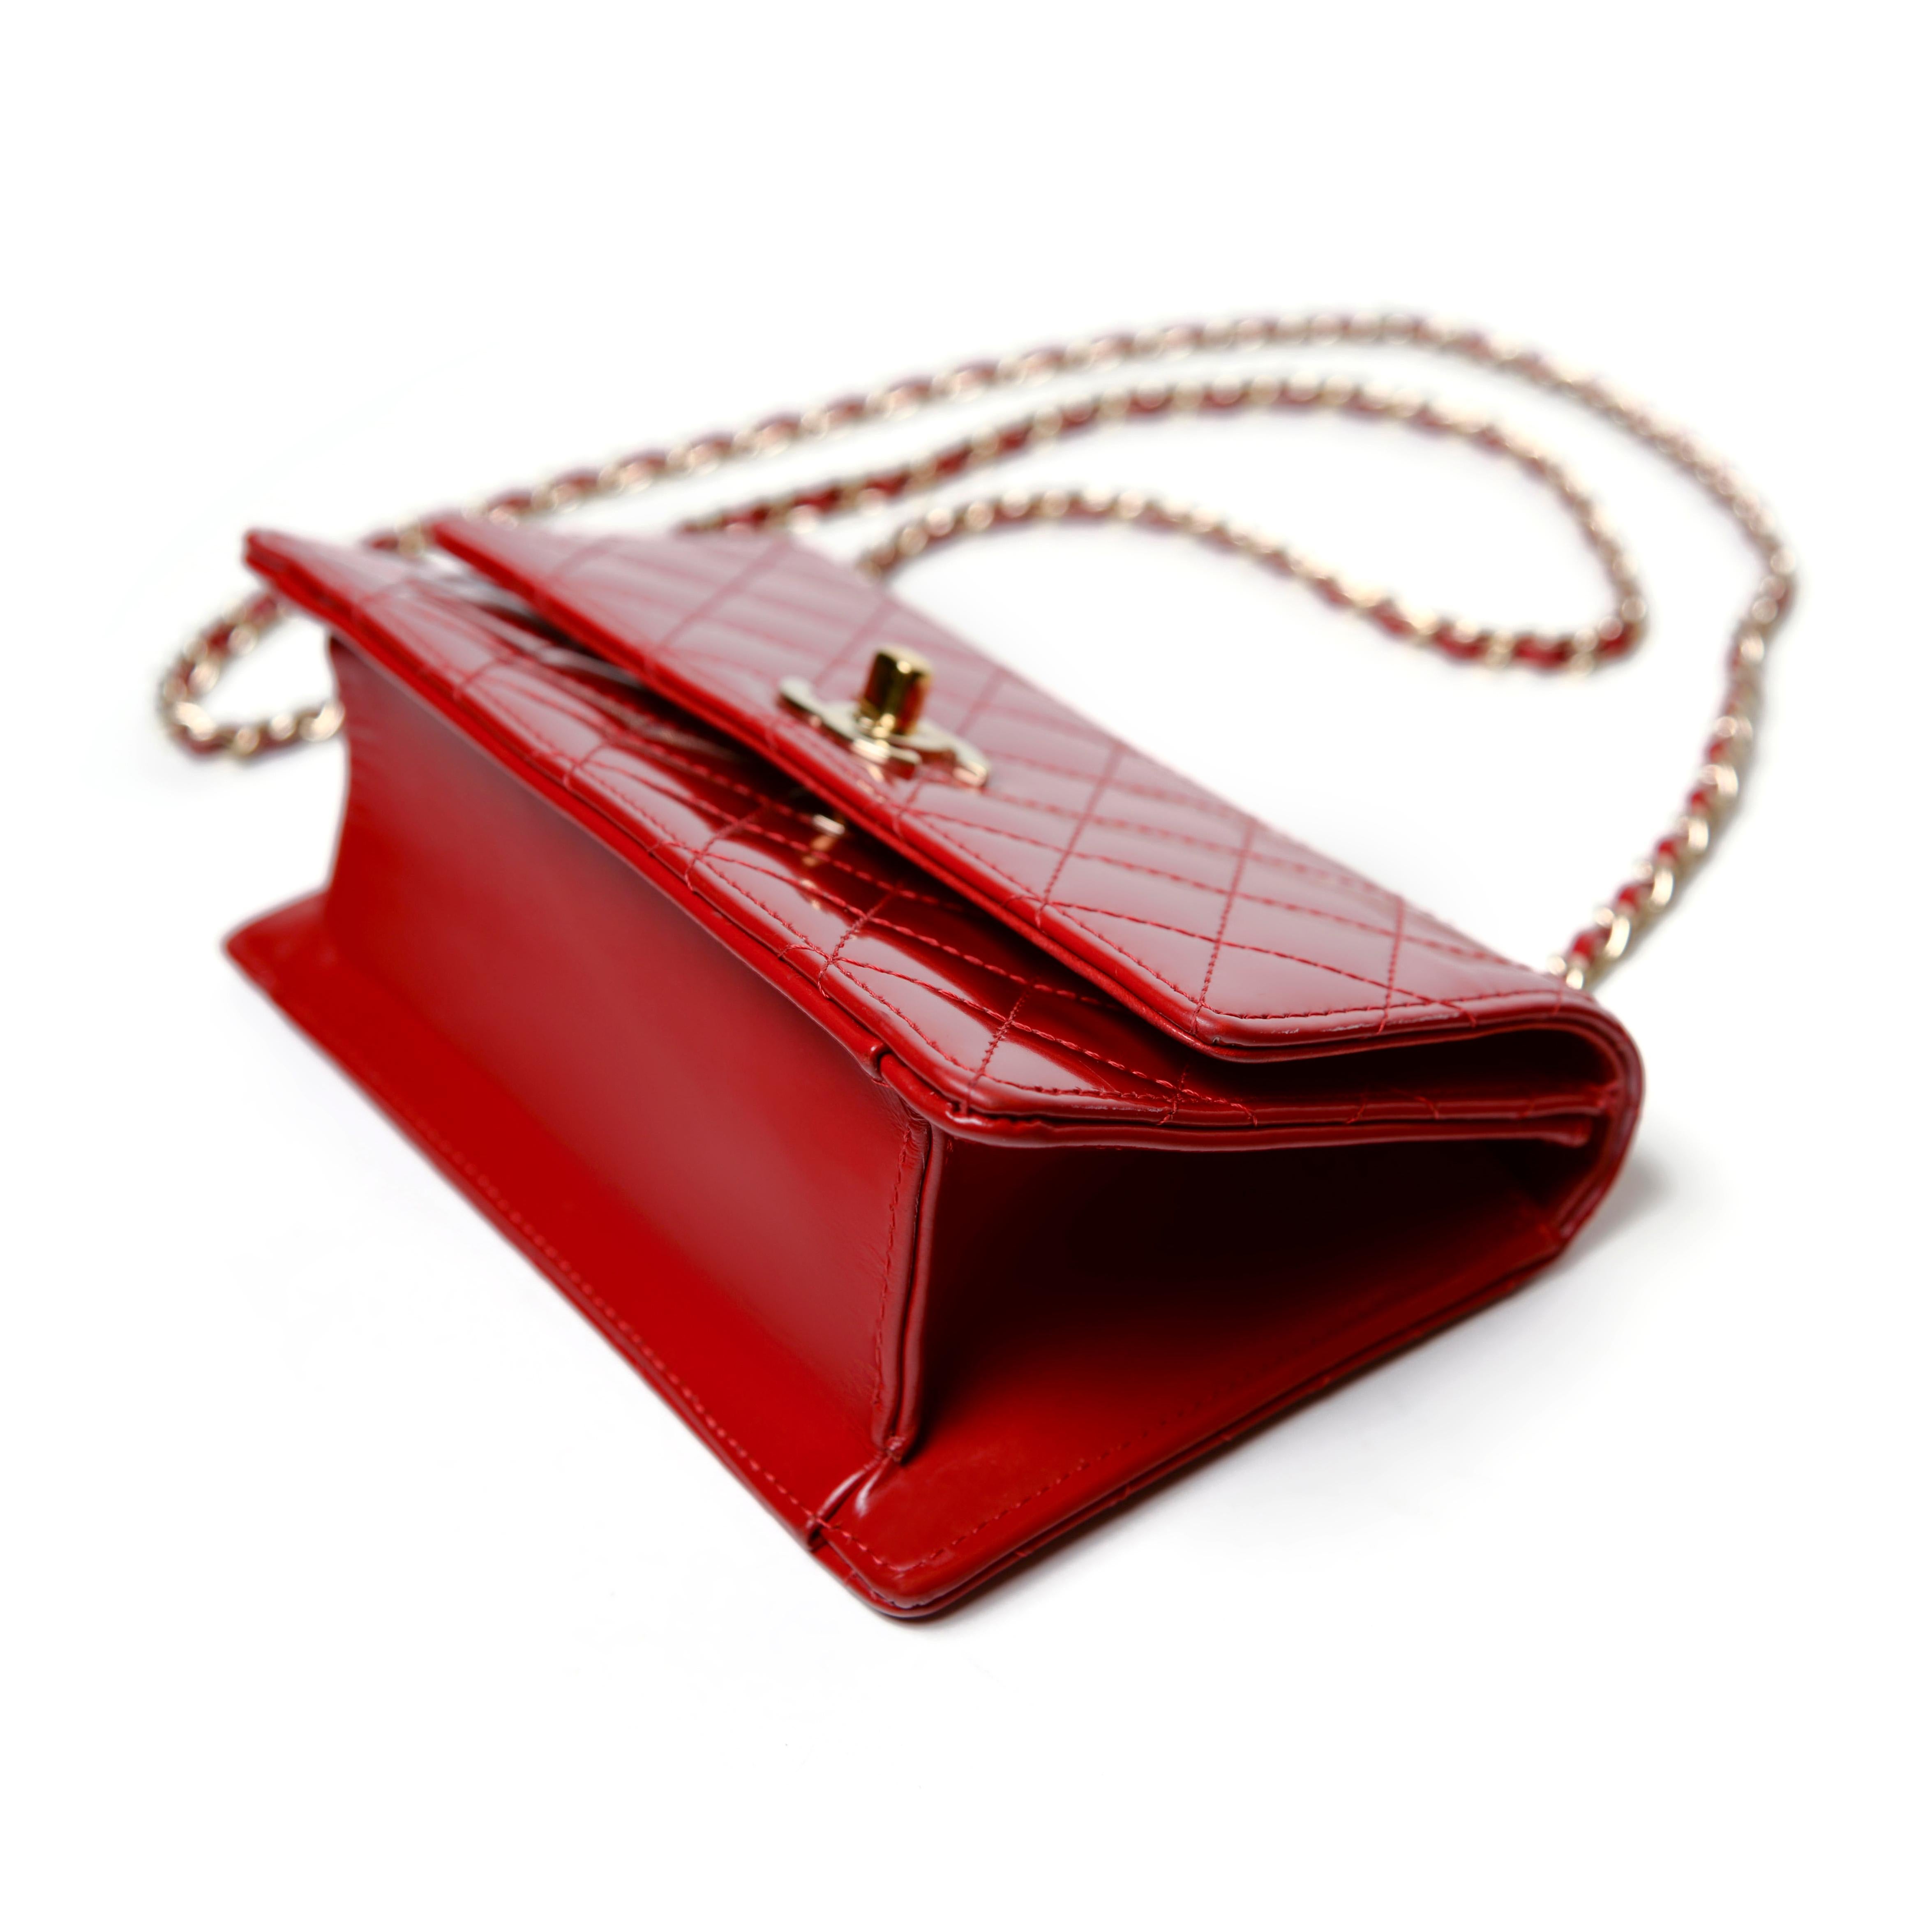 Chanel Classic Red Mini Flap Bag Patent Leather For Sale 5